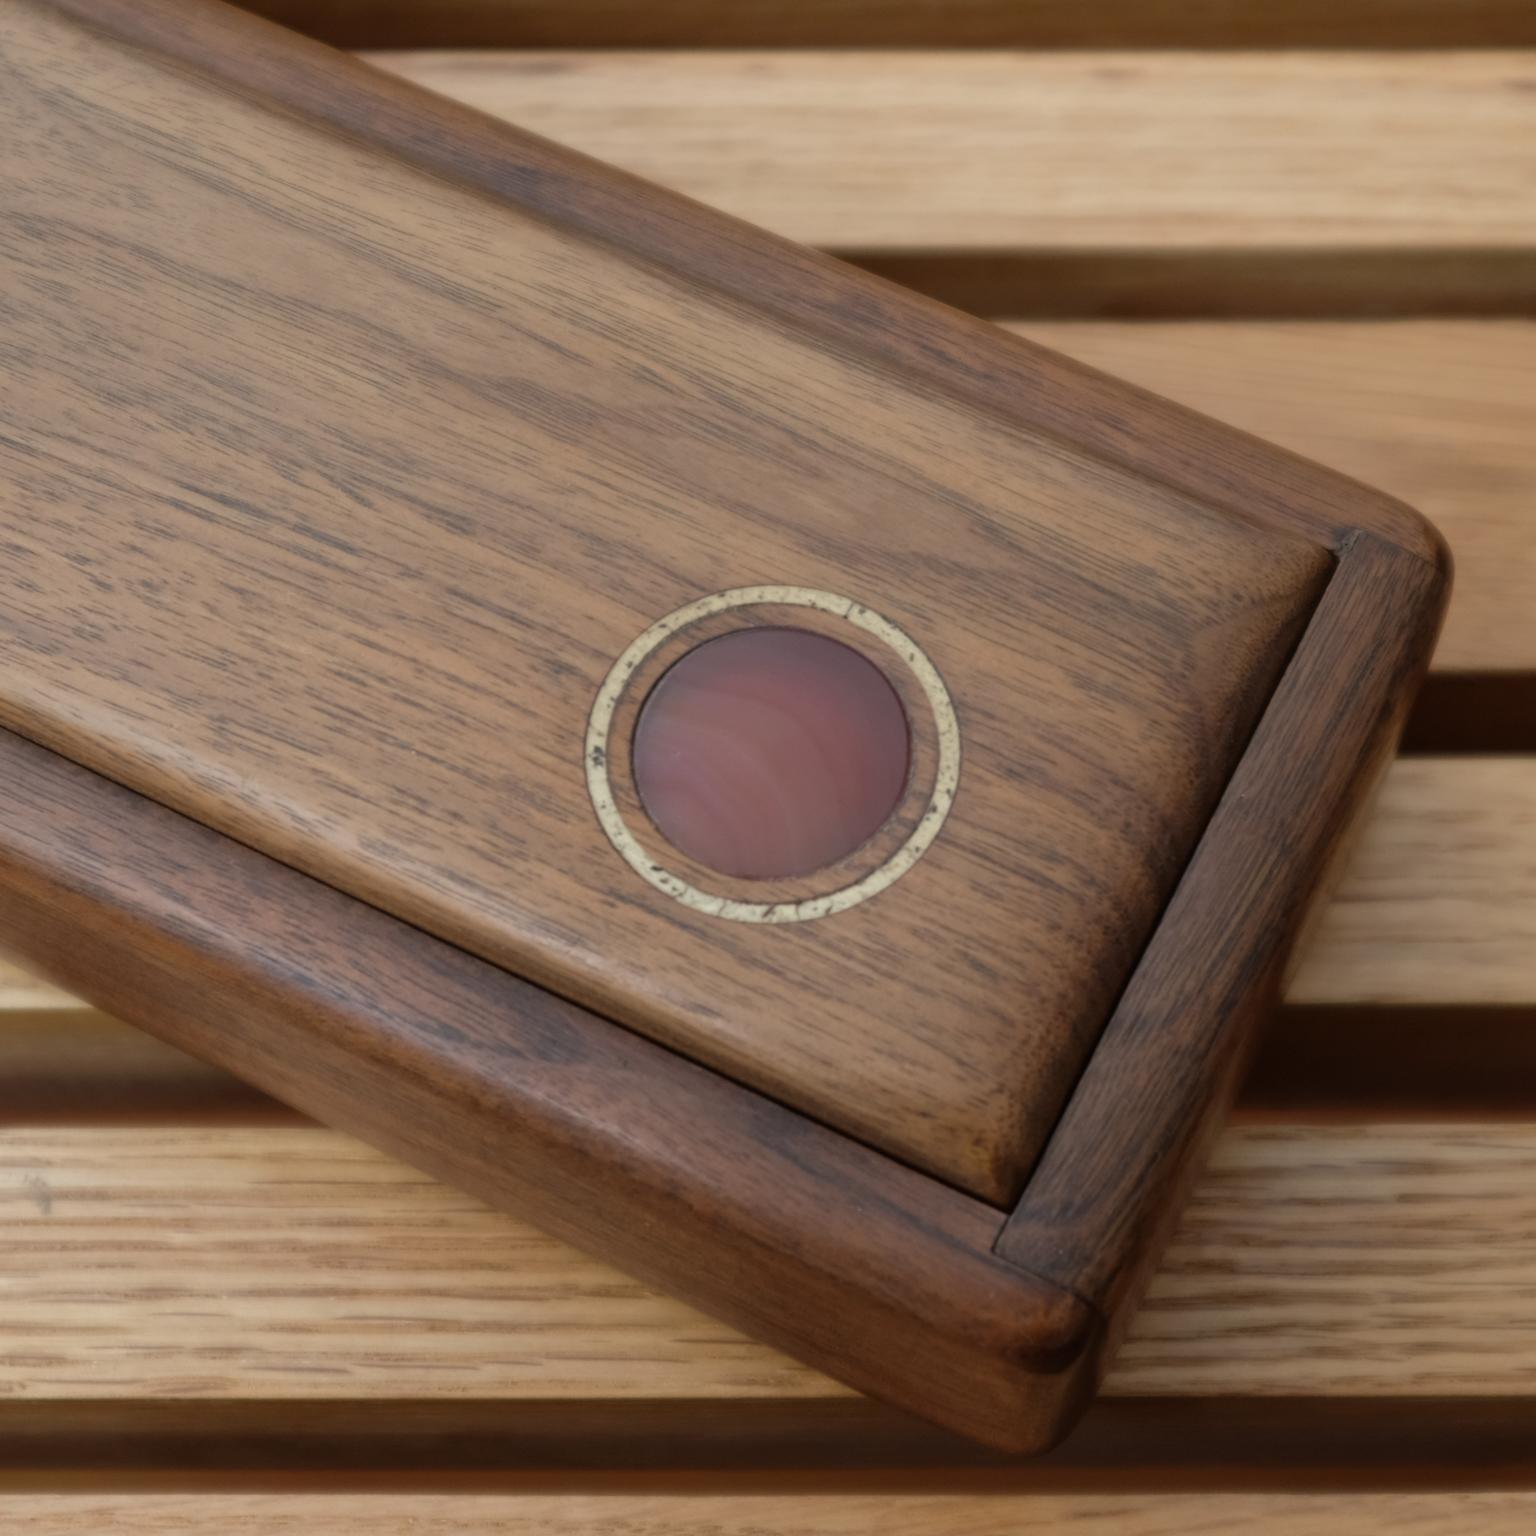 Handcrafted walnut jewelry box with a inlaid wood and carnelian element. The sliding top reveals a maroon velvet lining. The wood divider is removable. 1960s